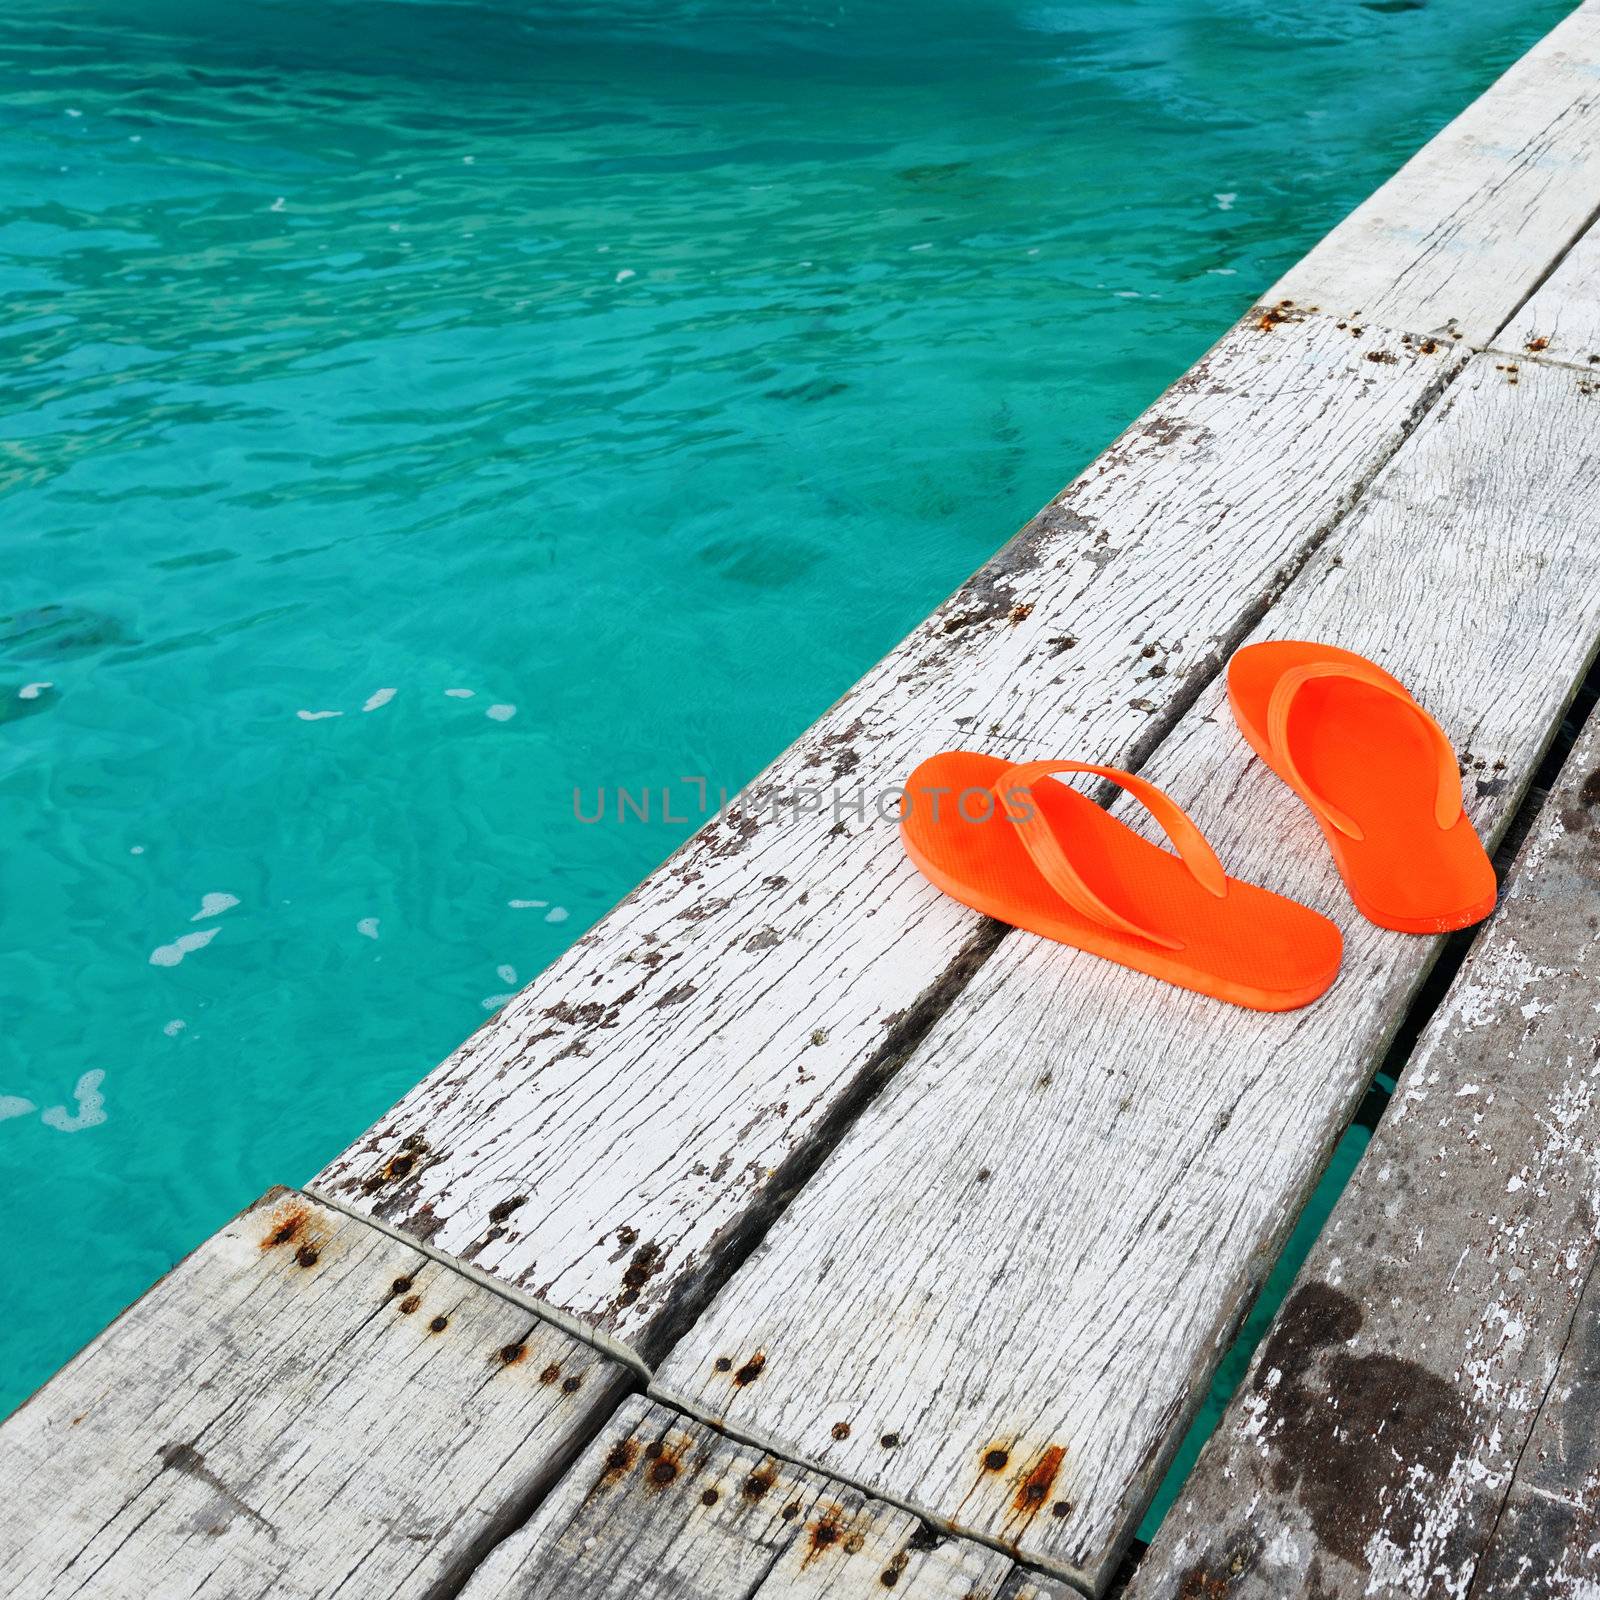 Sandals at jetty by the sea